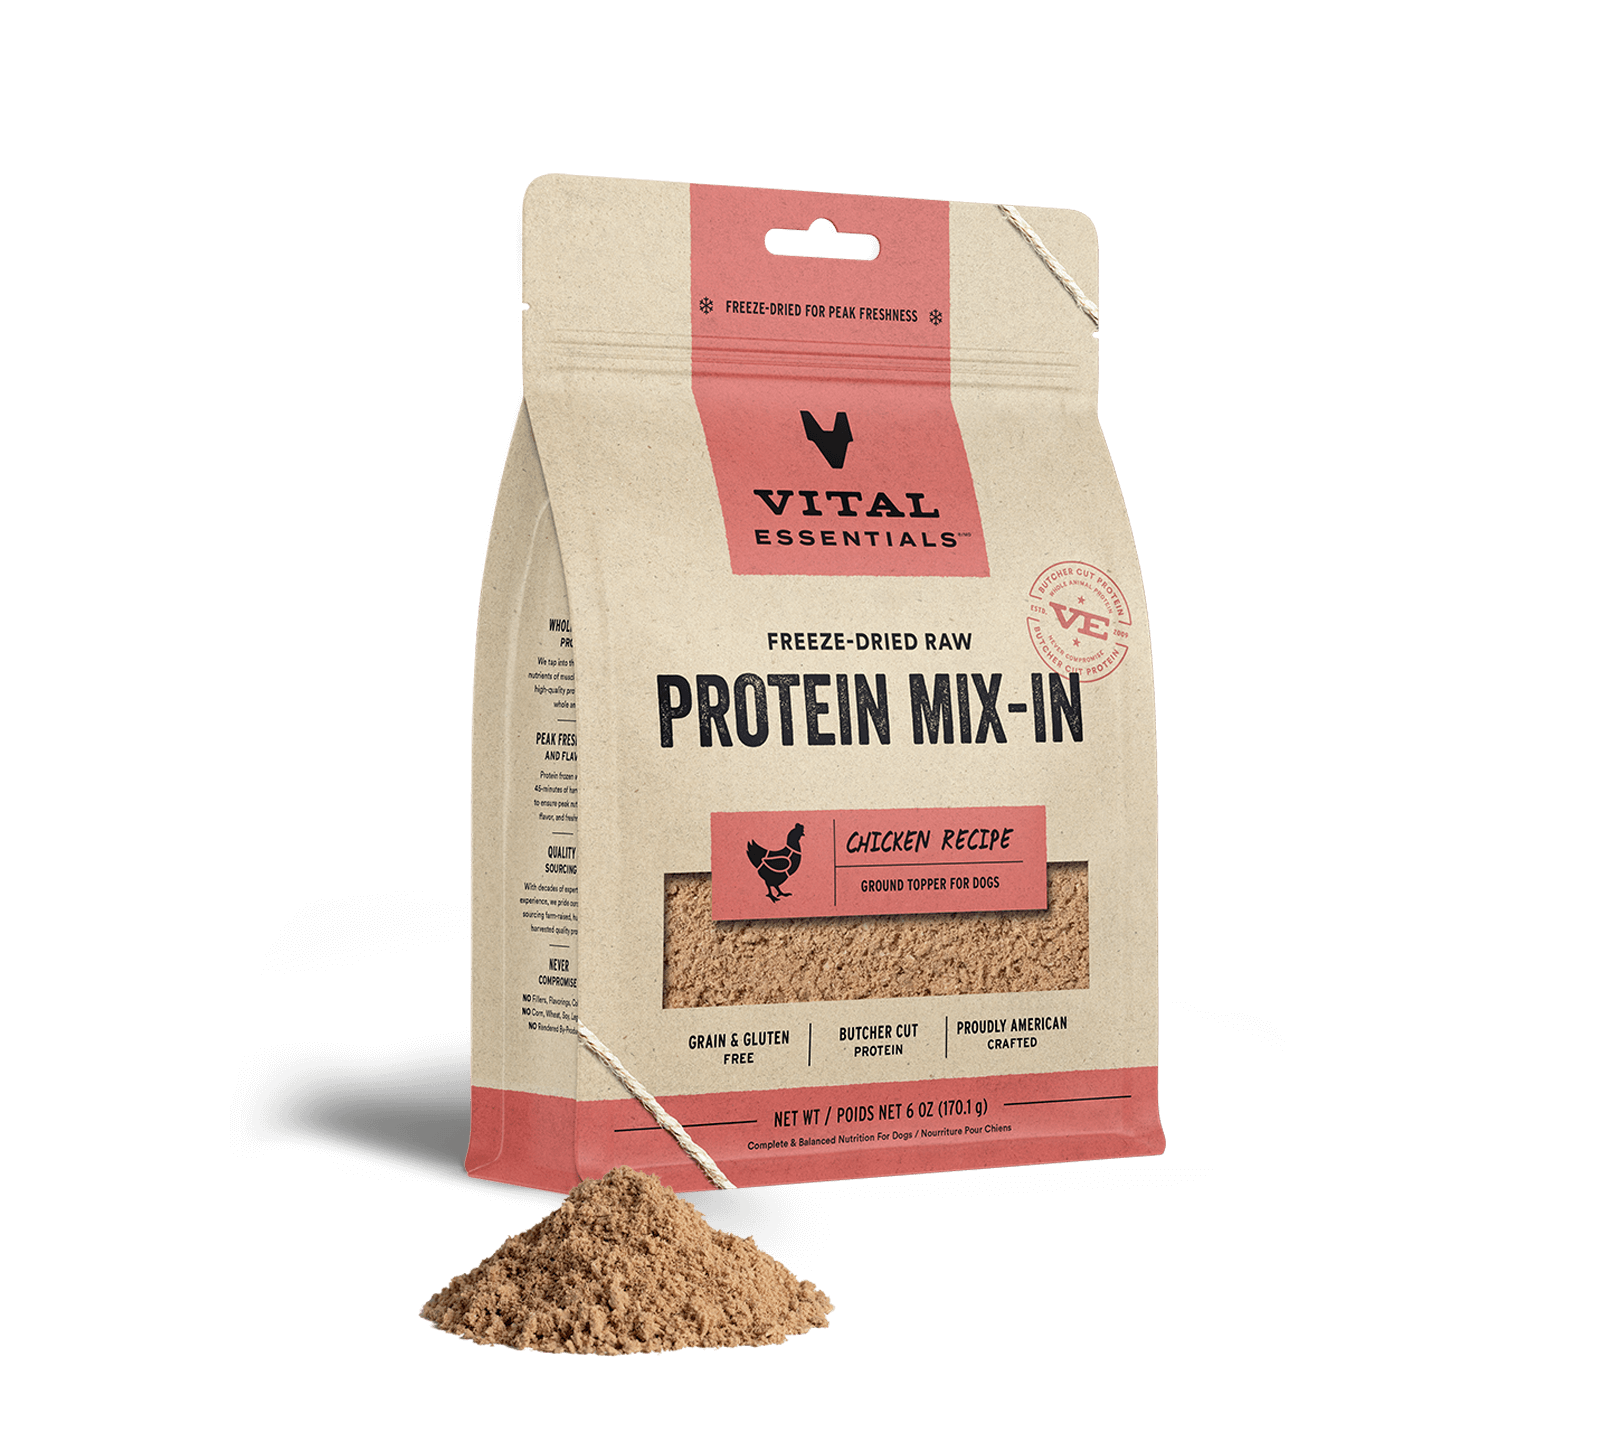 Vital Essentials Freeze-Dried Raw Protein Mix-In Chicken Recipe Ground Topper for Dogs, 6 oz - Items on Sale Now